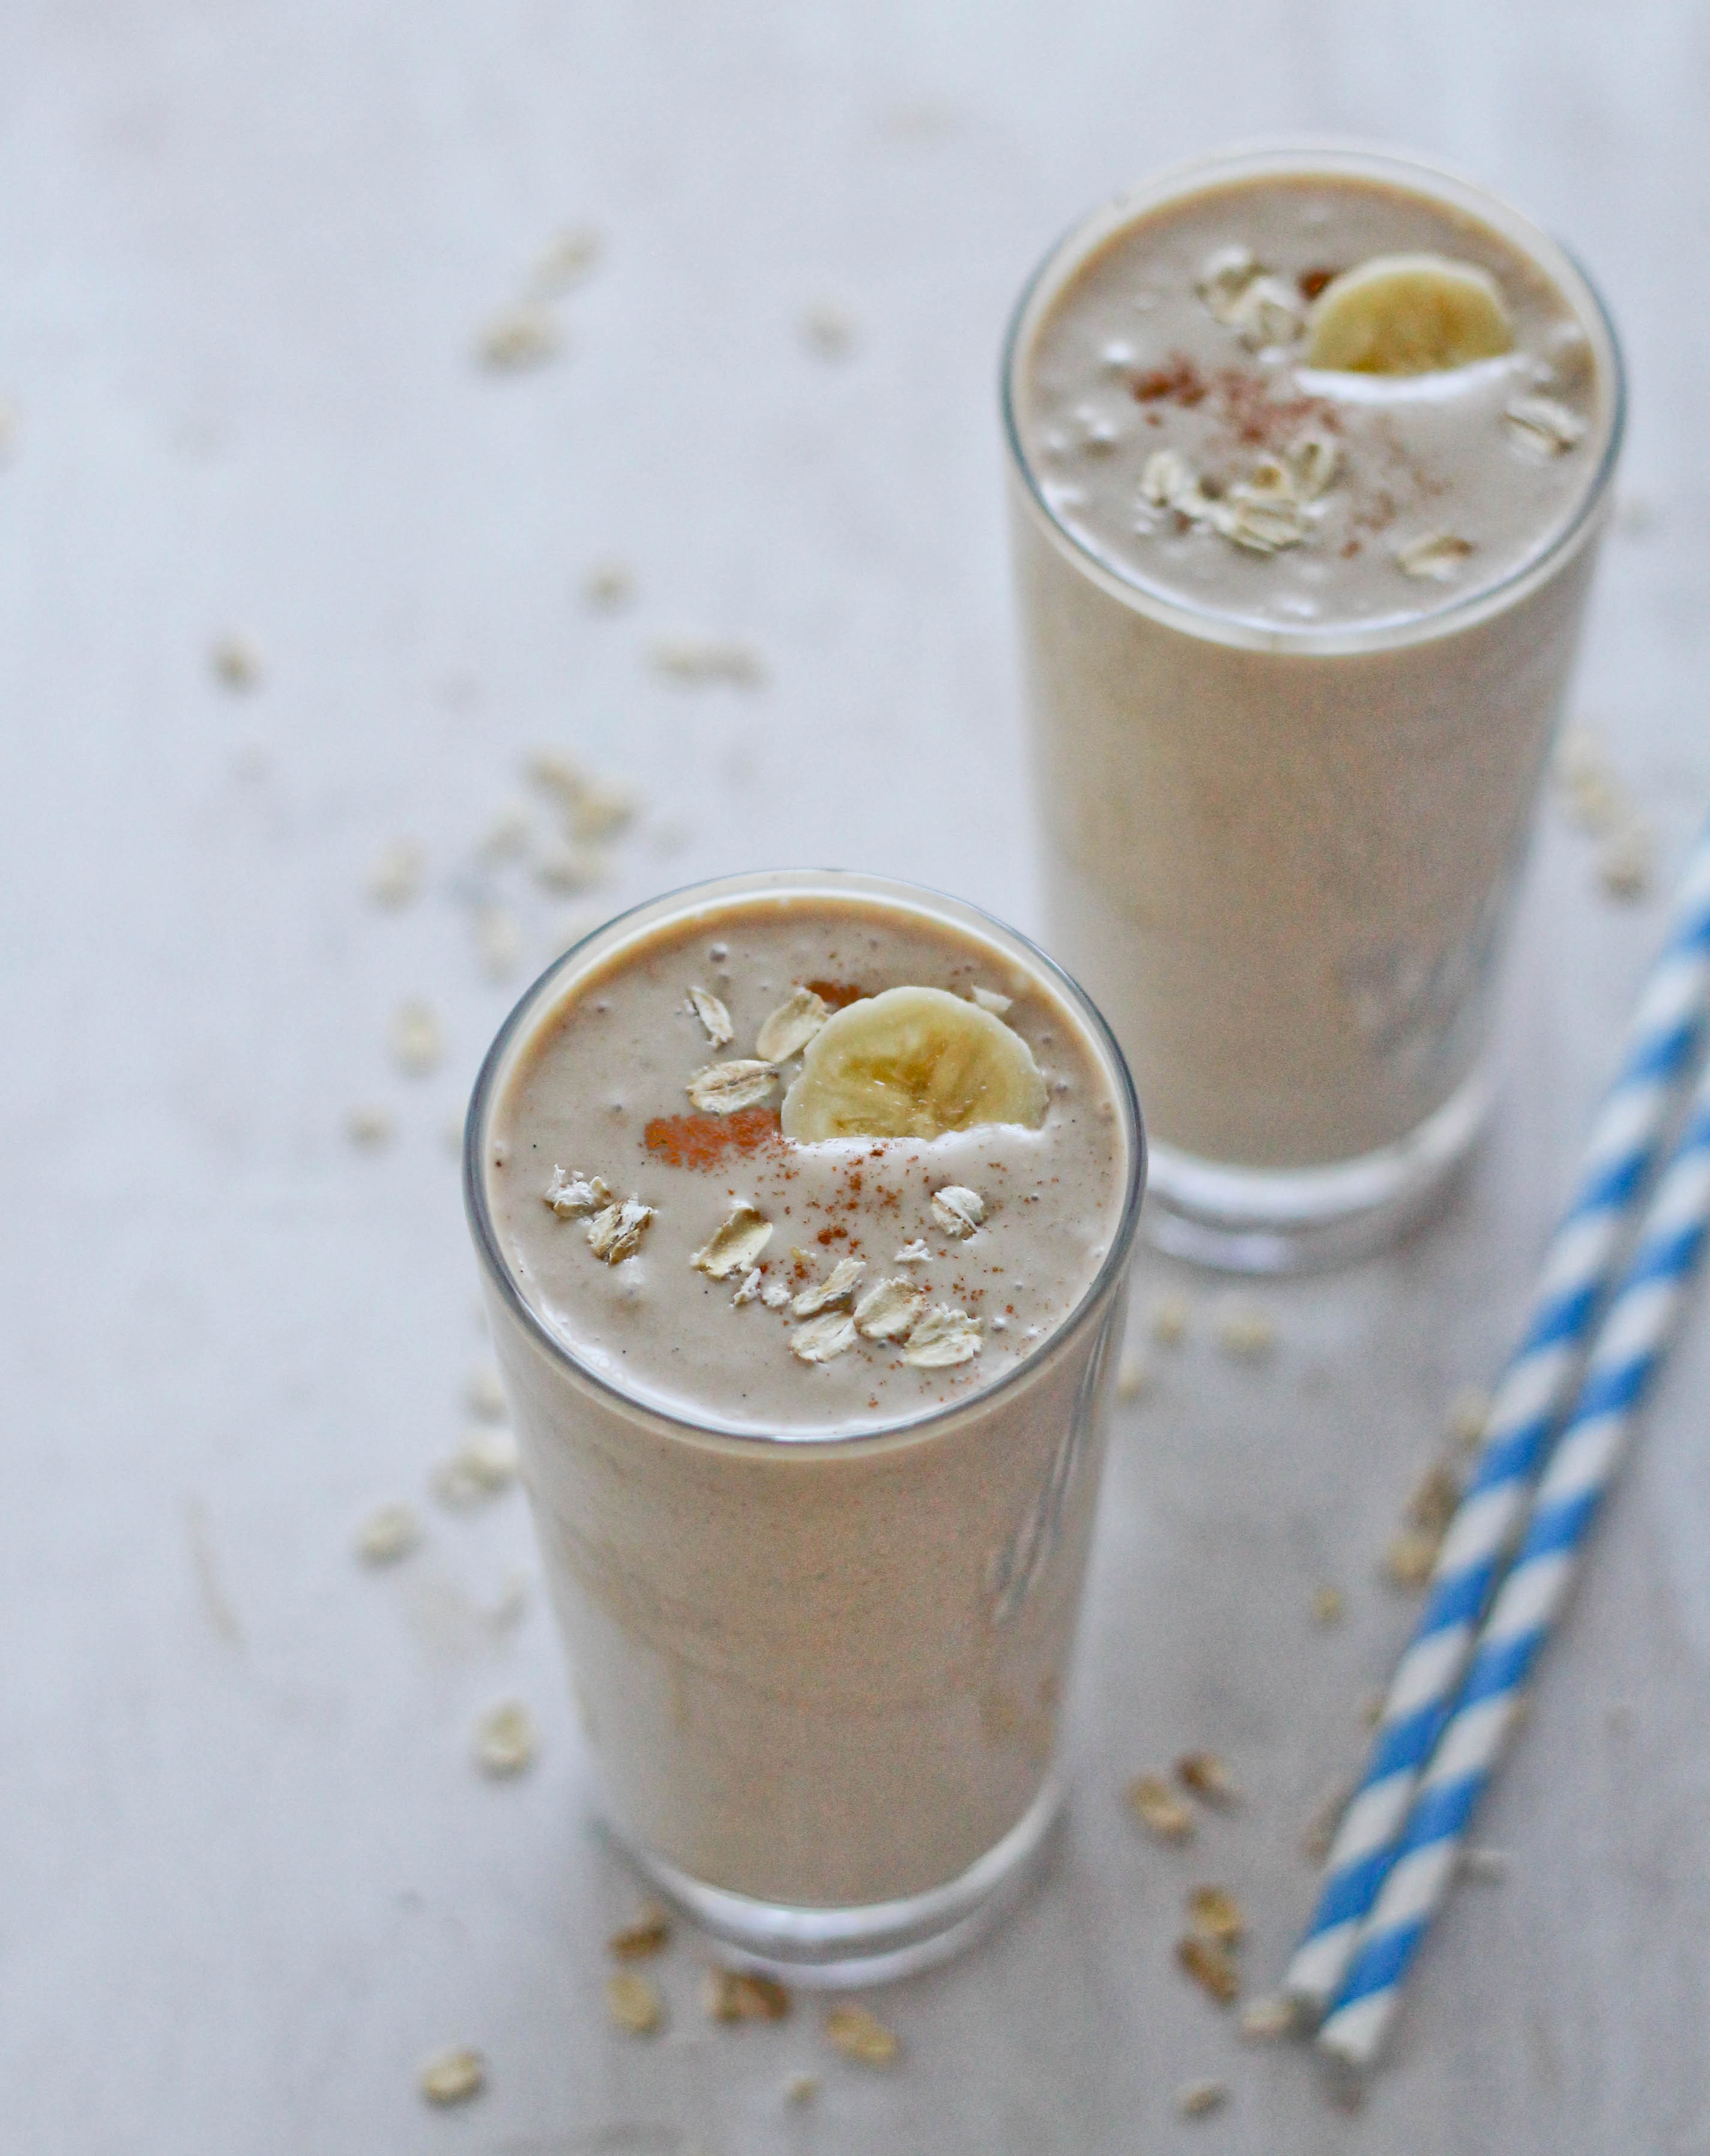 PB BANANA OAT SMOOTHIE - Jehan Can Cook